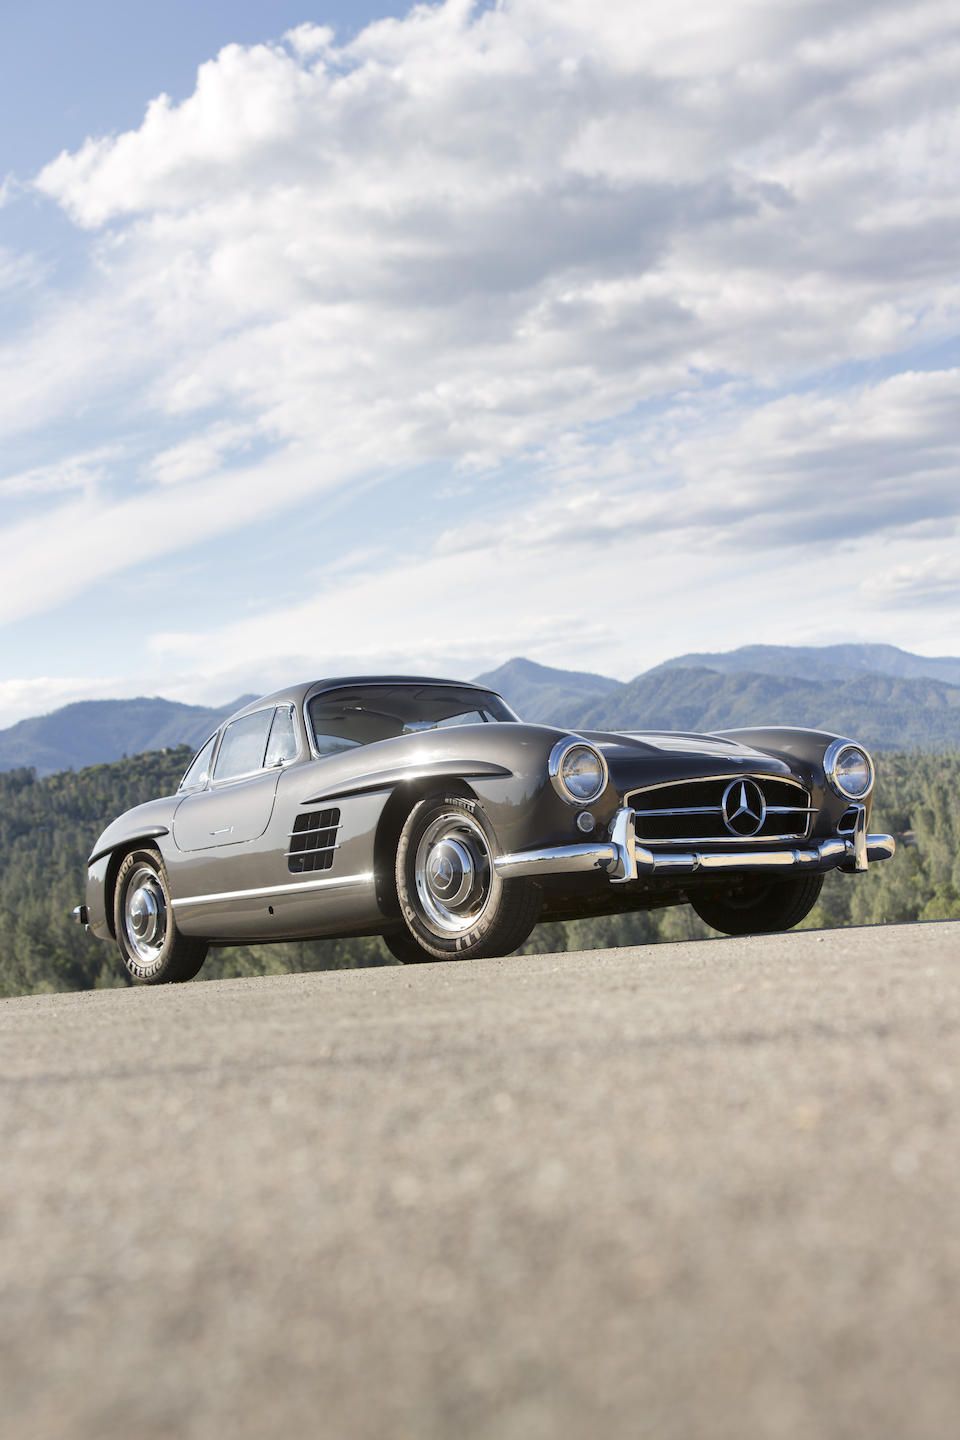 Bonhams, 1955 Mercedes Benz 300SL Gullwing Coupe Chassis No. 198.040.5500183 Engine No. 198.980.5500184